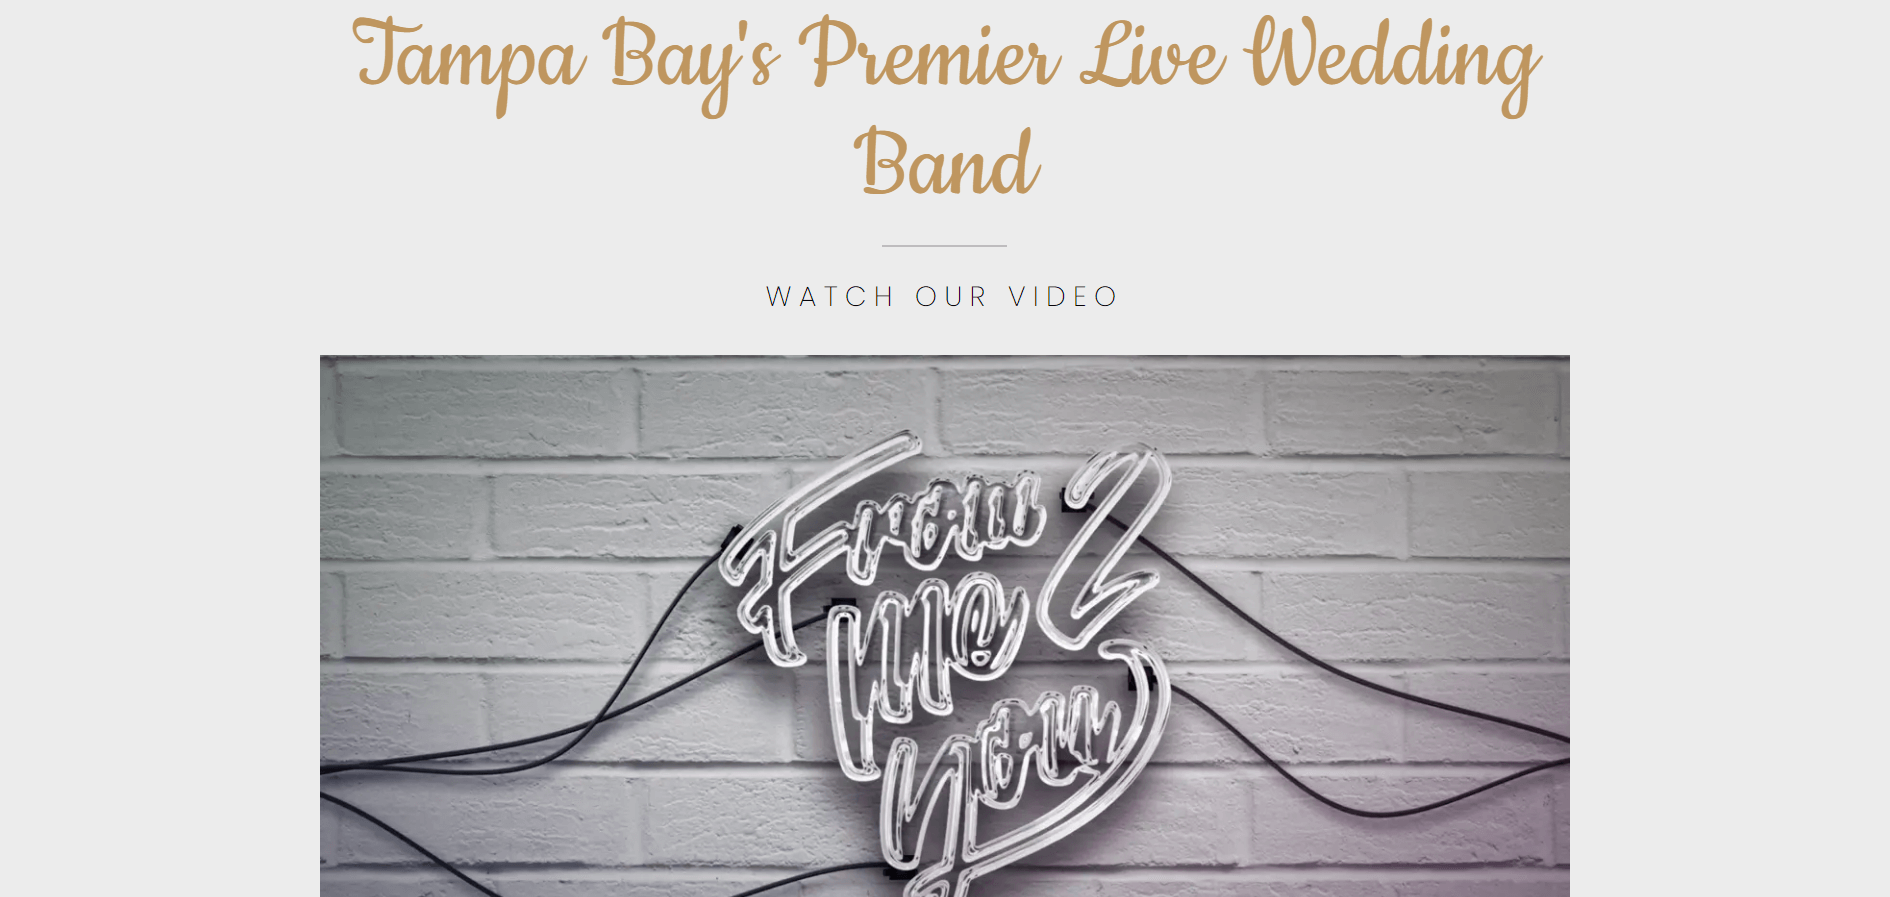 Top 30 Wedding Bands, Singers & Musicians Melbourne [2021]  by Wild Romantic Photography Melbourne